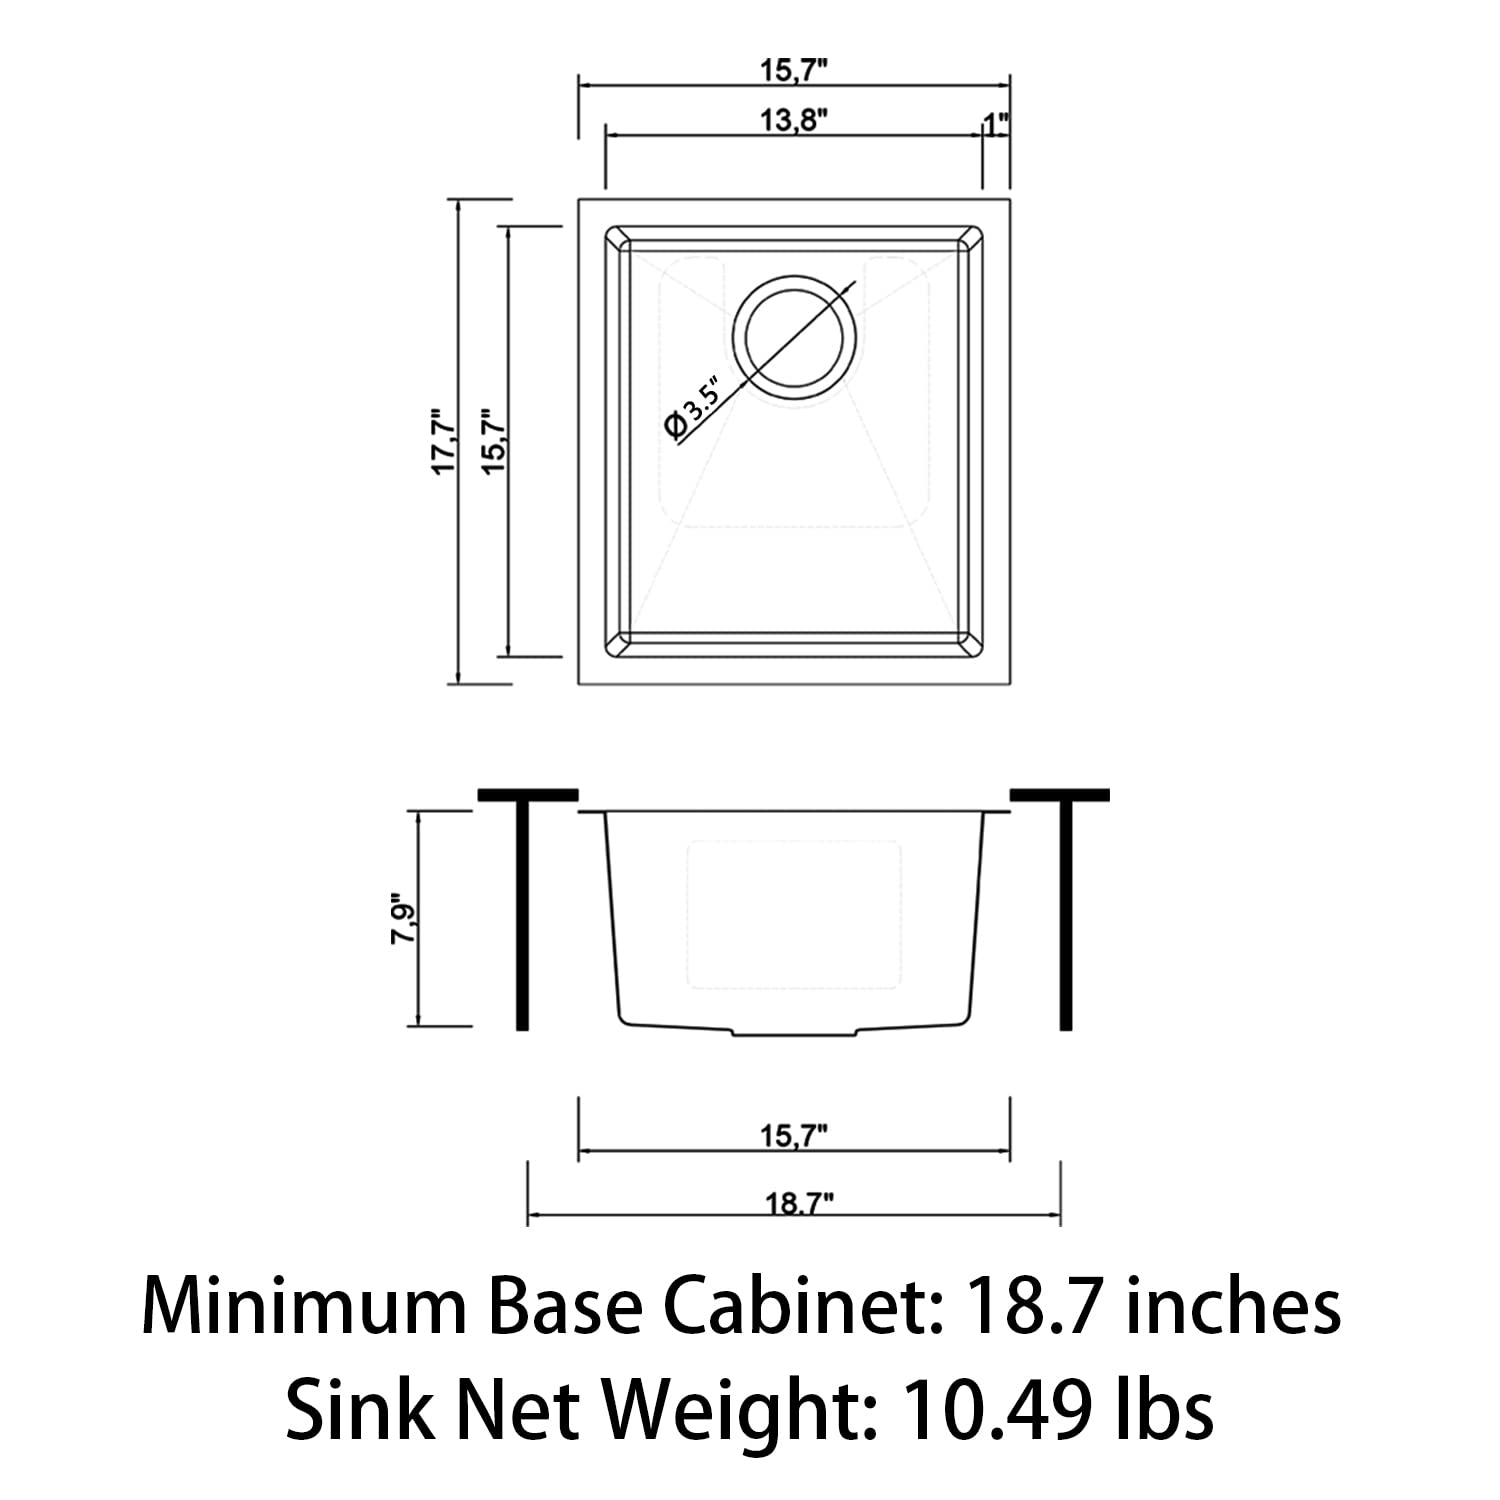 Sinber 16" x 18" x 8" Undermount Single Bowl Kitchen Sink with 18 Gauge 304 Stainless Steel Satin Finish HU1517S-S (Sink Only)